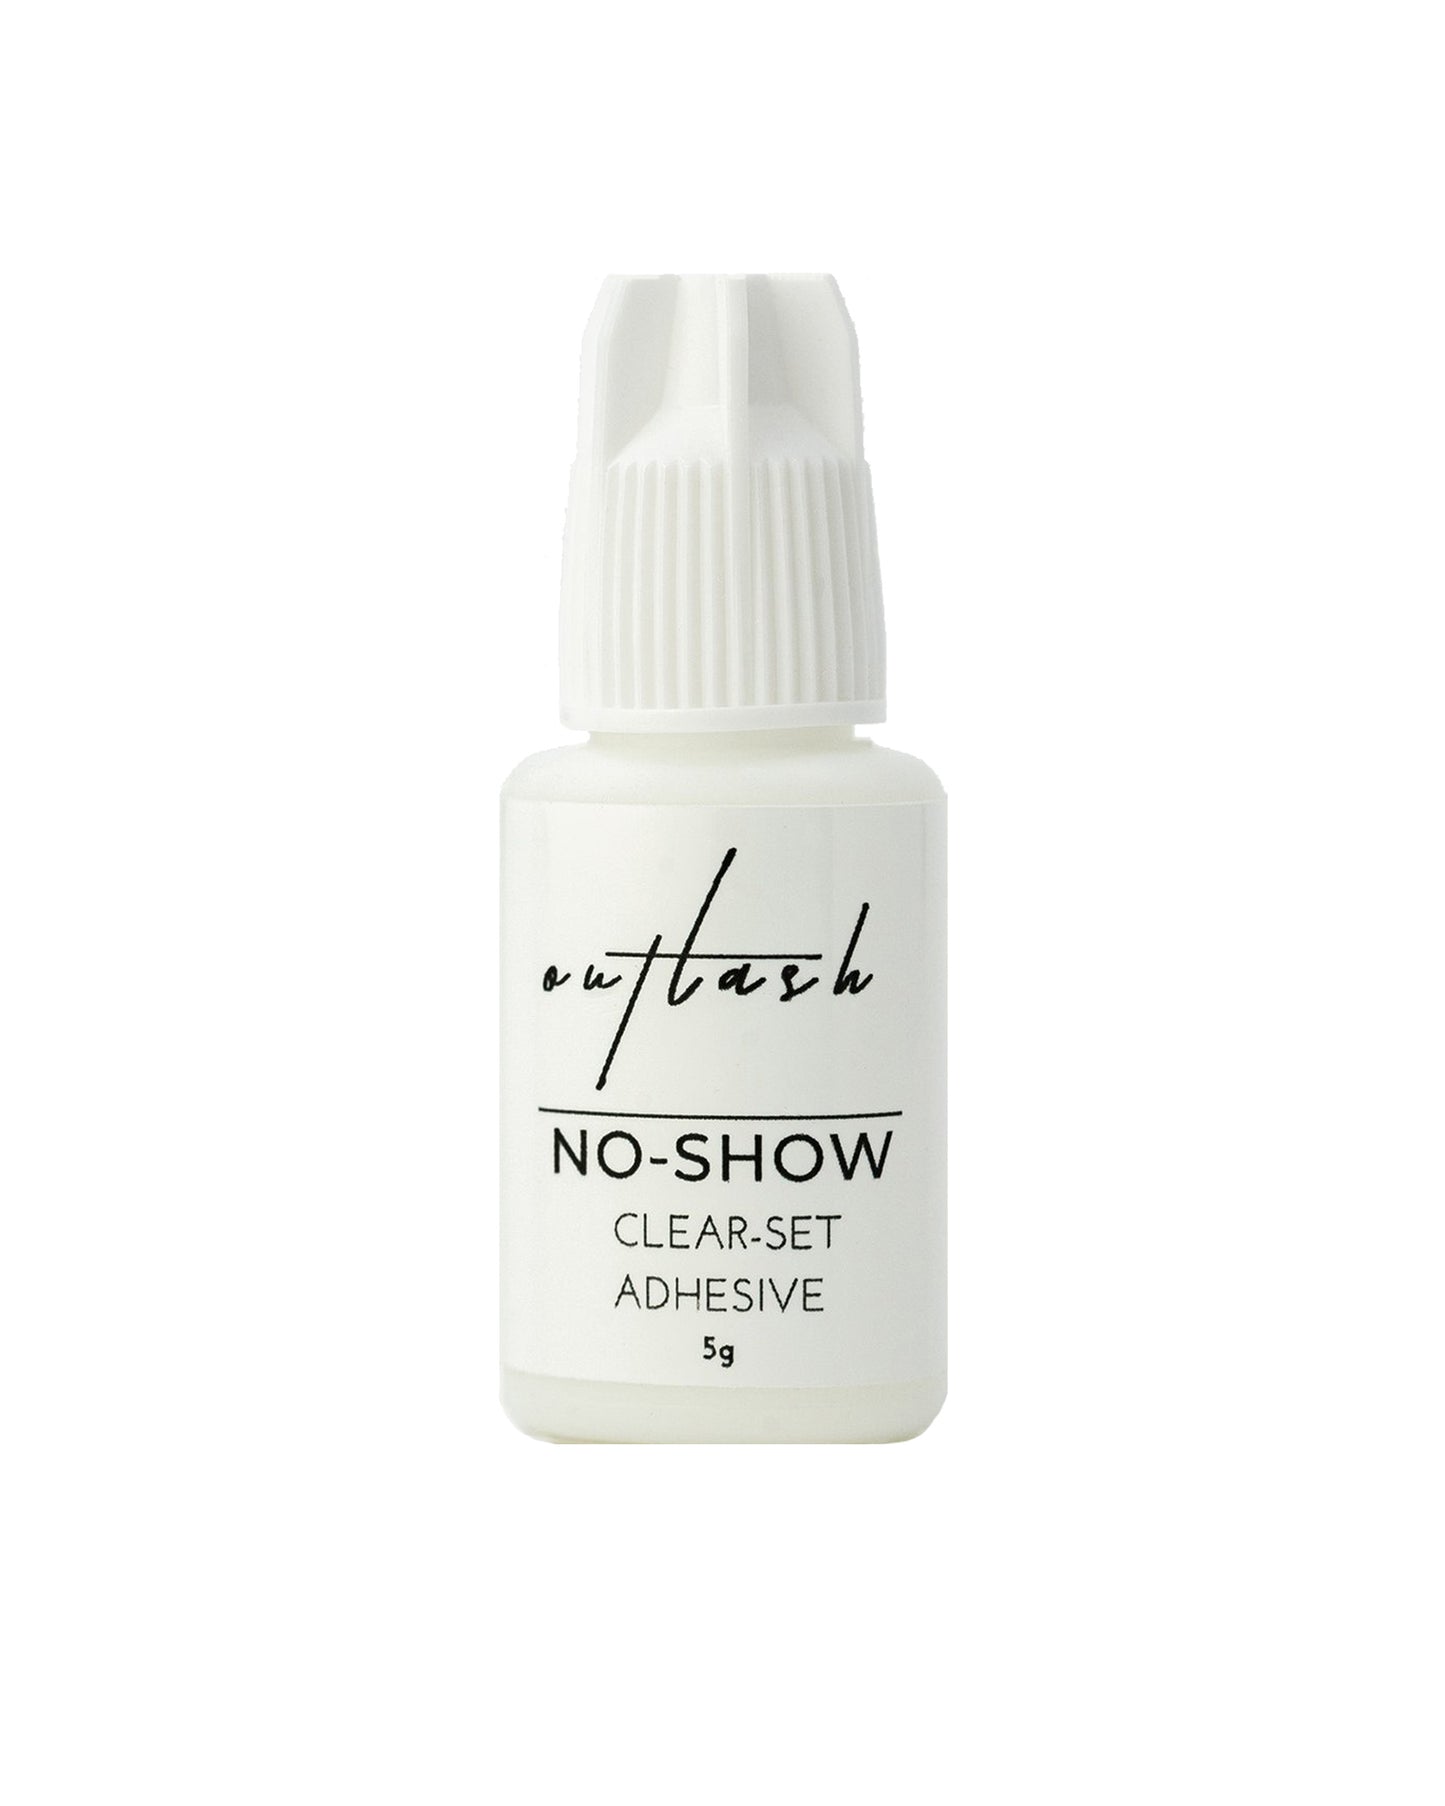 No-Show Clear Set Adhesive - Outlash Extensions Pro US